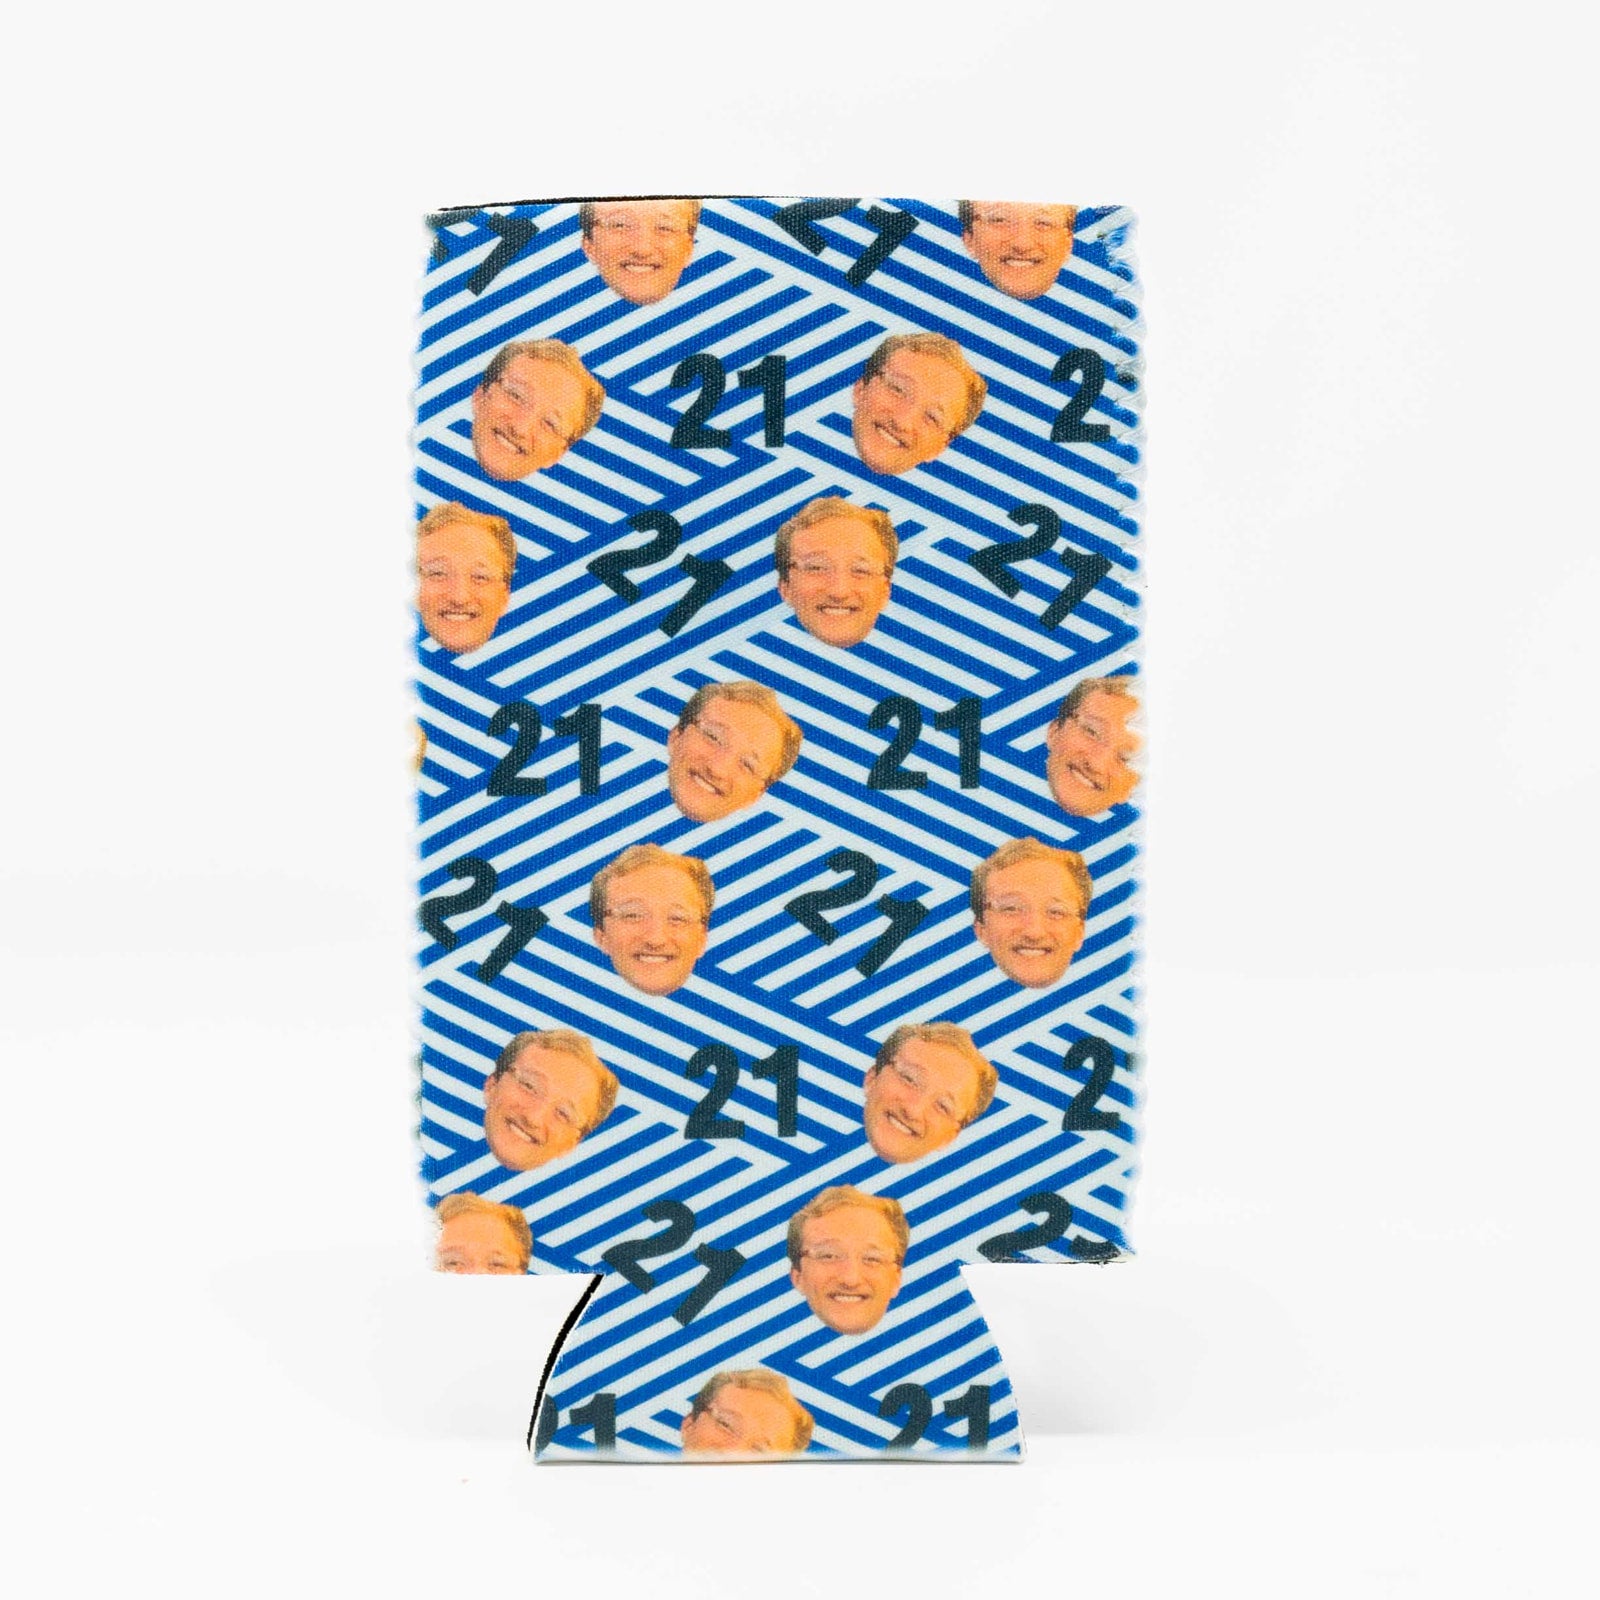 CUSTOM Repeating Face Birthday Drink Insulator—Blue and White Striped